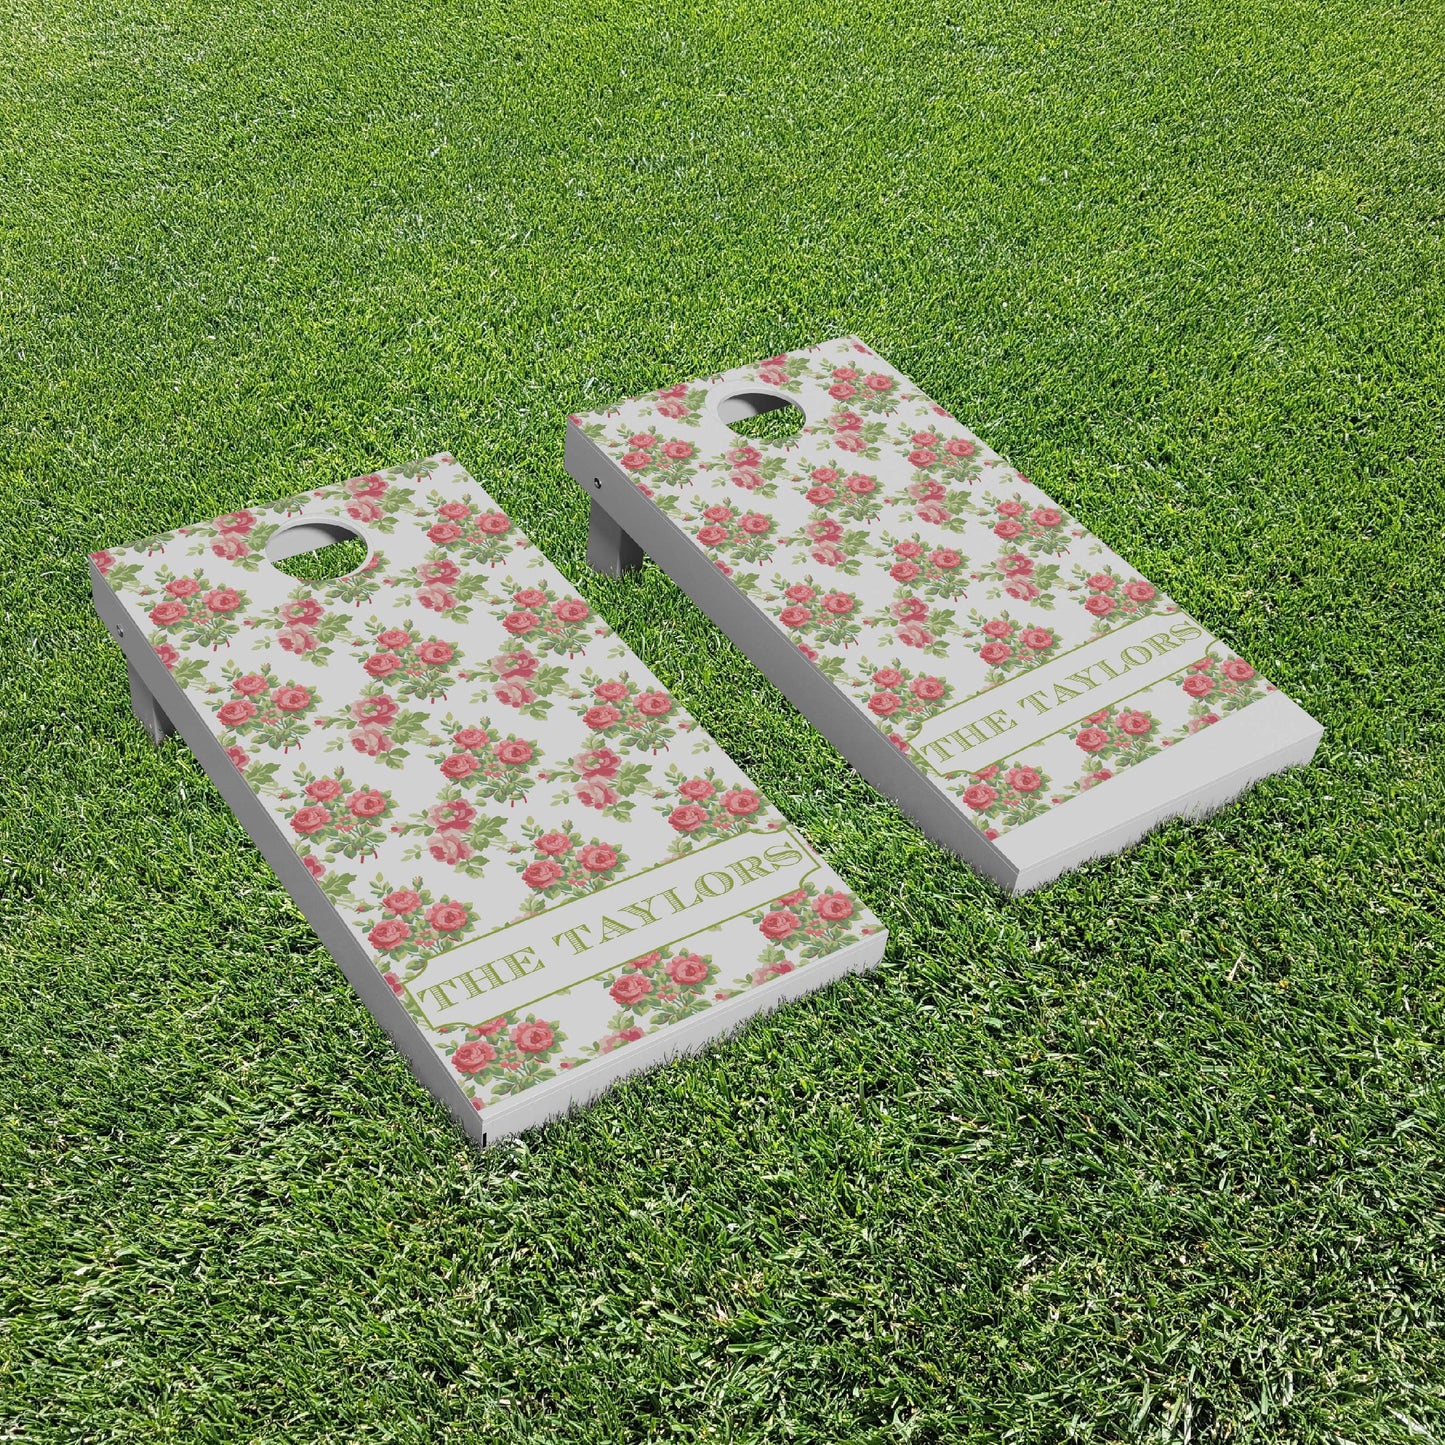 Luxury Personalized Shabby Chic Cornhole Boards - A Perfect Gift!